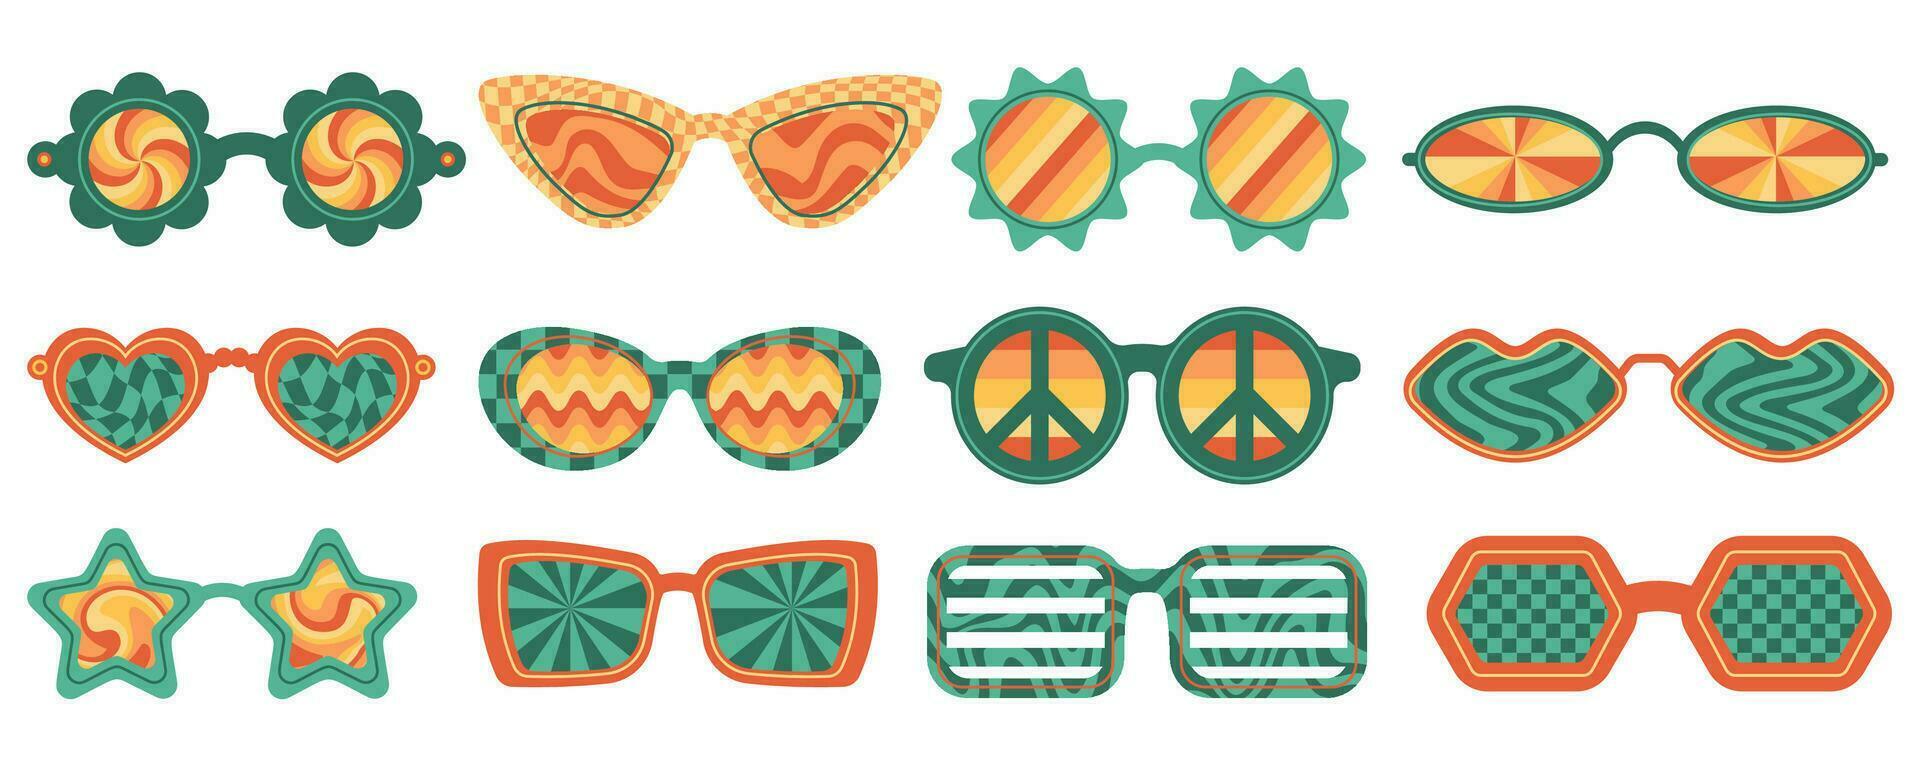 Groovy vector sunglasses. Retro hippy eyewear. Heart star and flower-shaped glasses. 70s funky design. Set of summer outfit